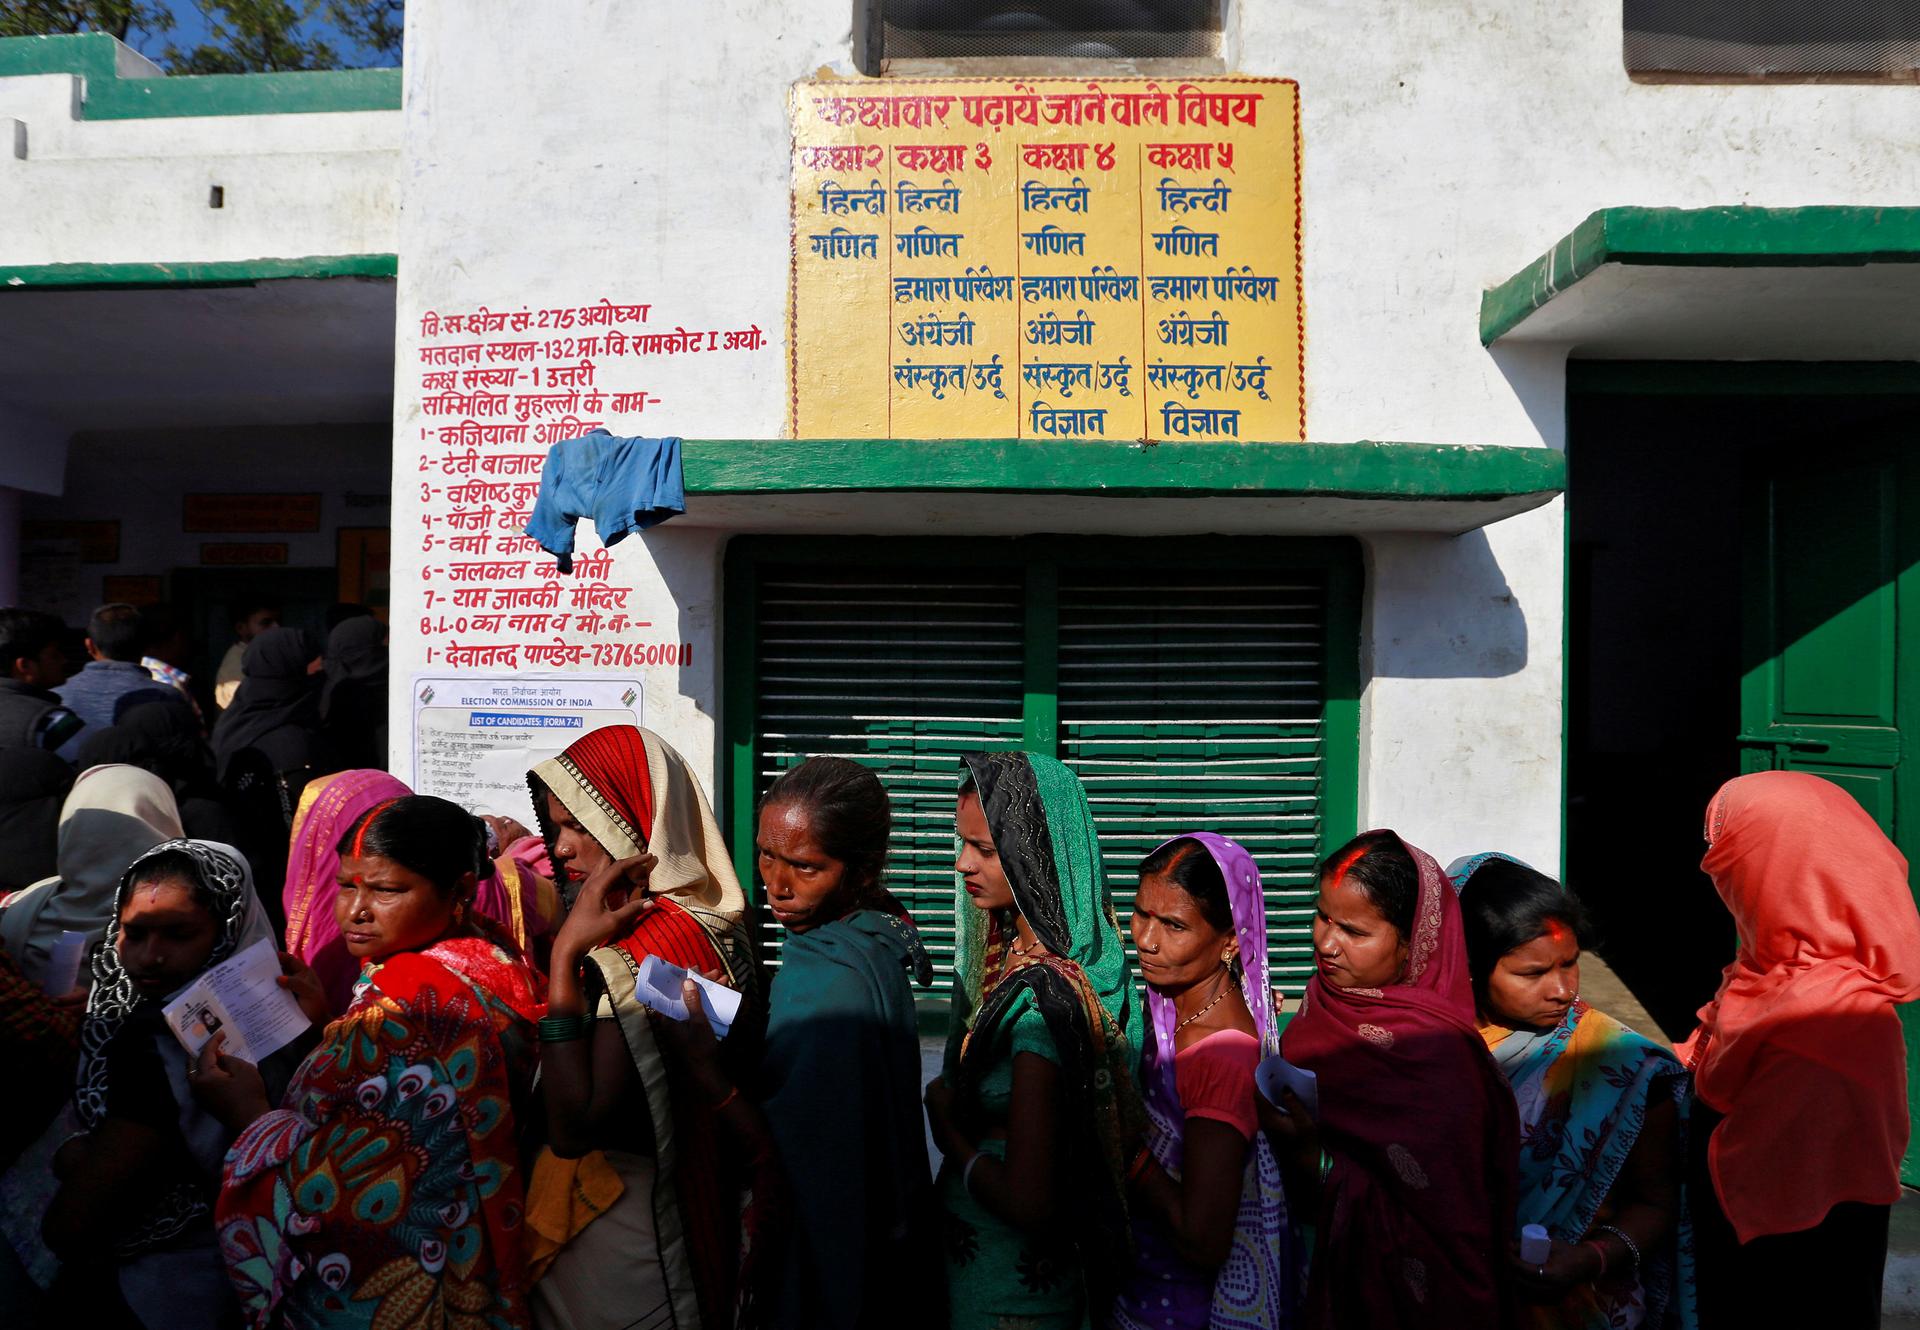 Women queue up to vote during the state assembly election, in the town of Ayodhya, in the state of Uttar Pradesh, India, February 27, 2017.